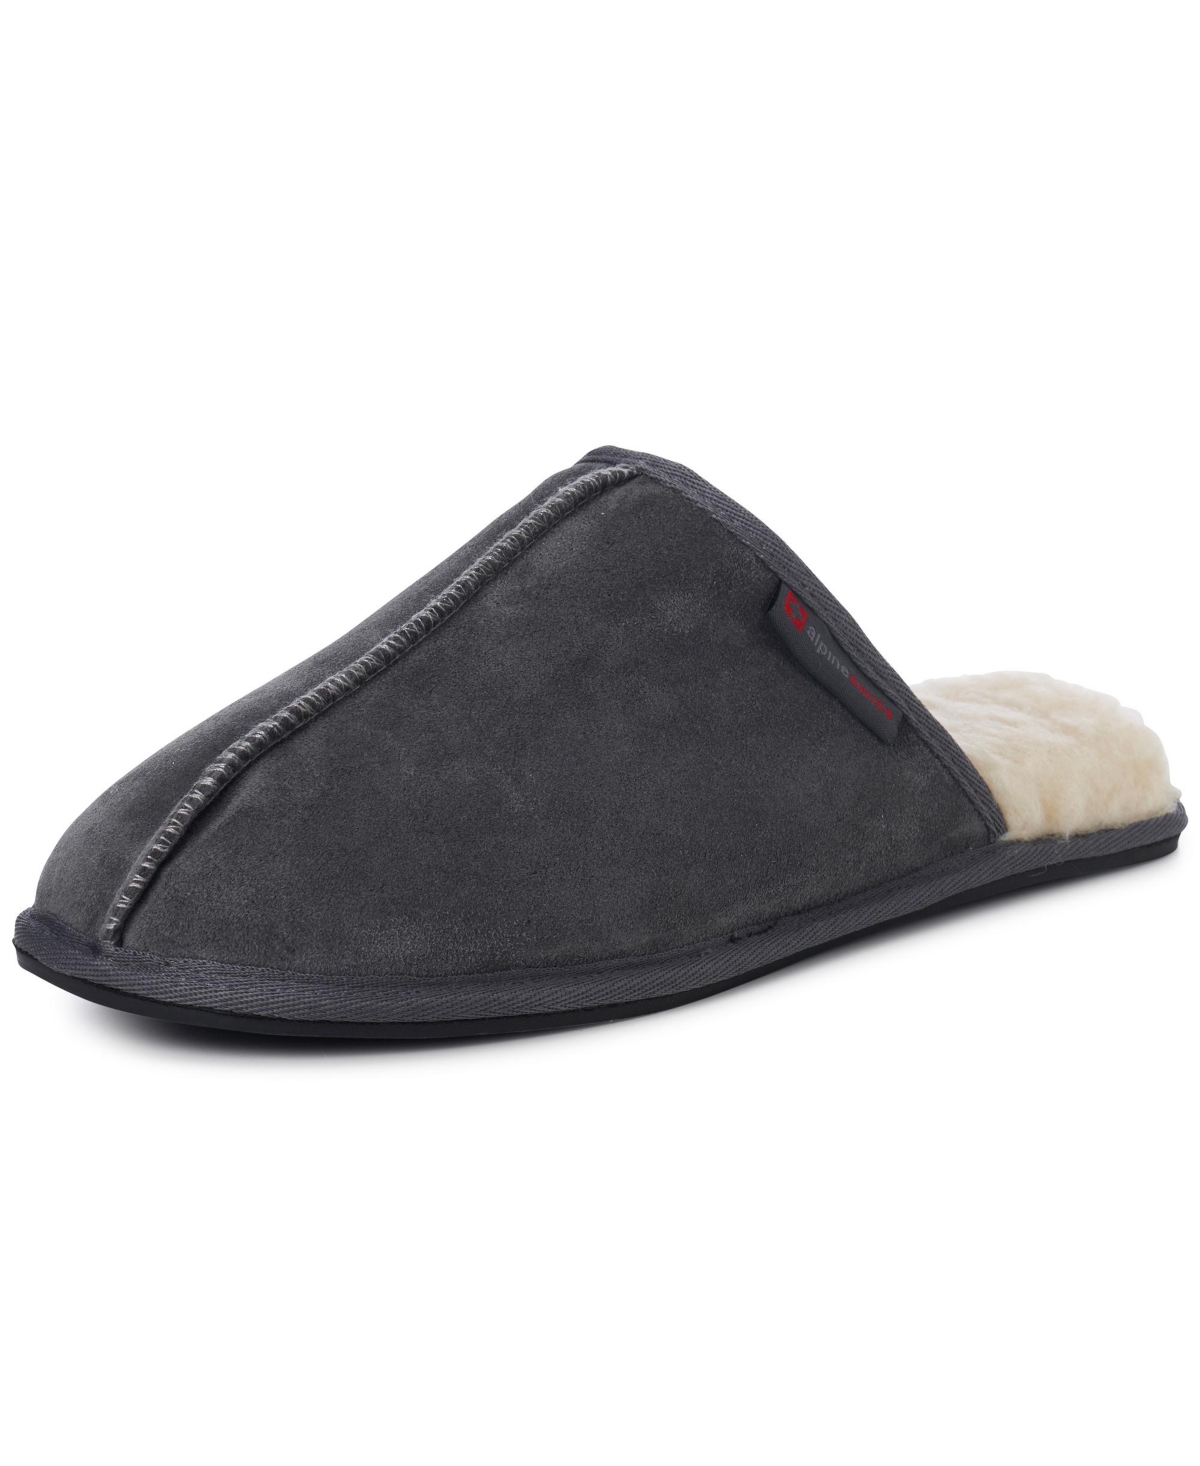 Mens Suede Memory Foam Scuff Slippers Comfort Slip On House Shoes - Navy